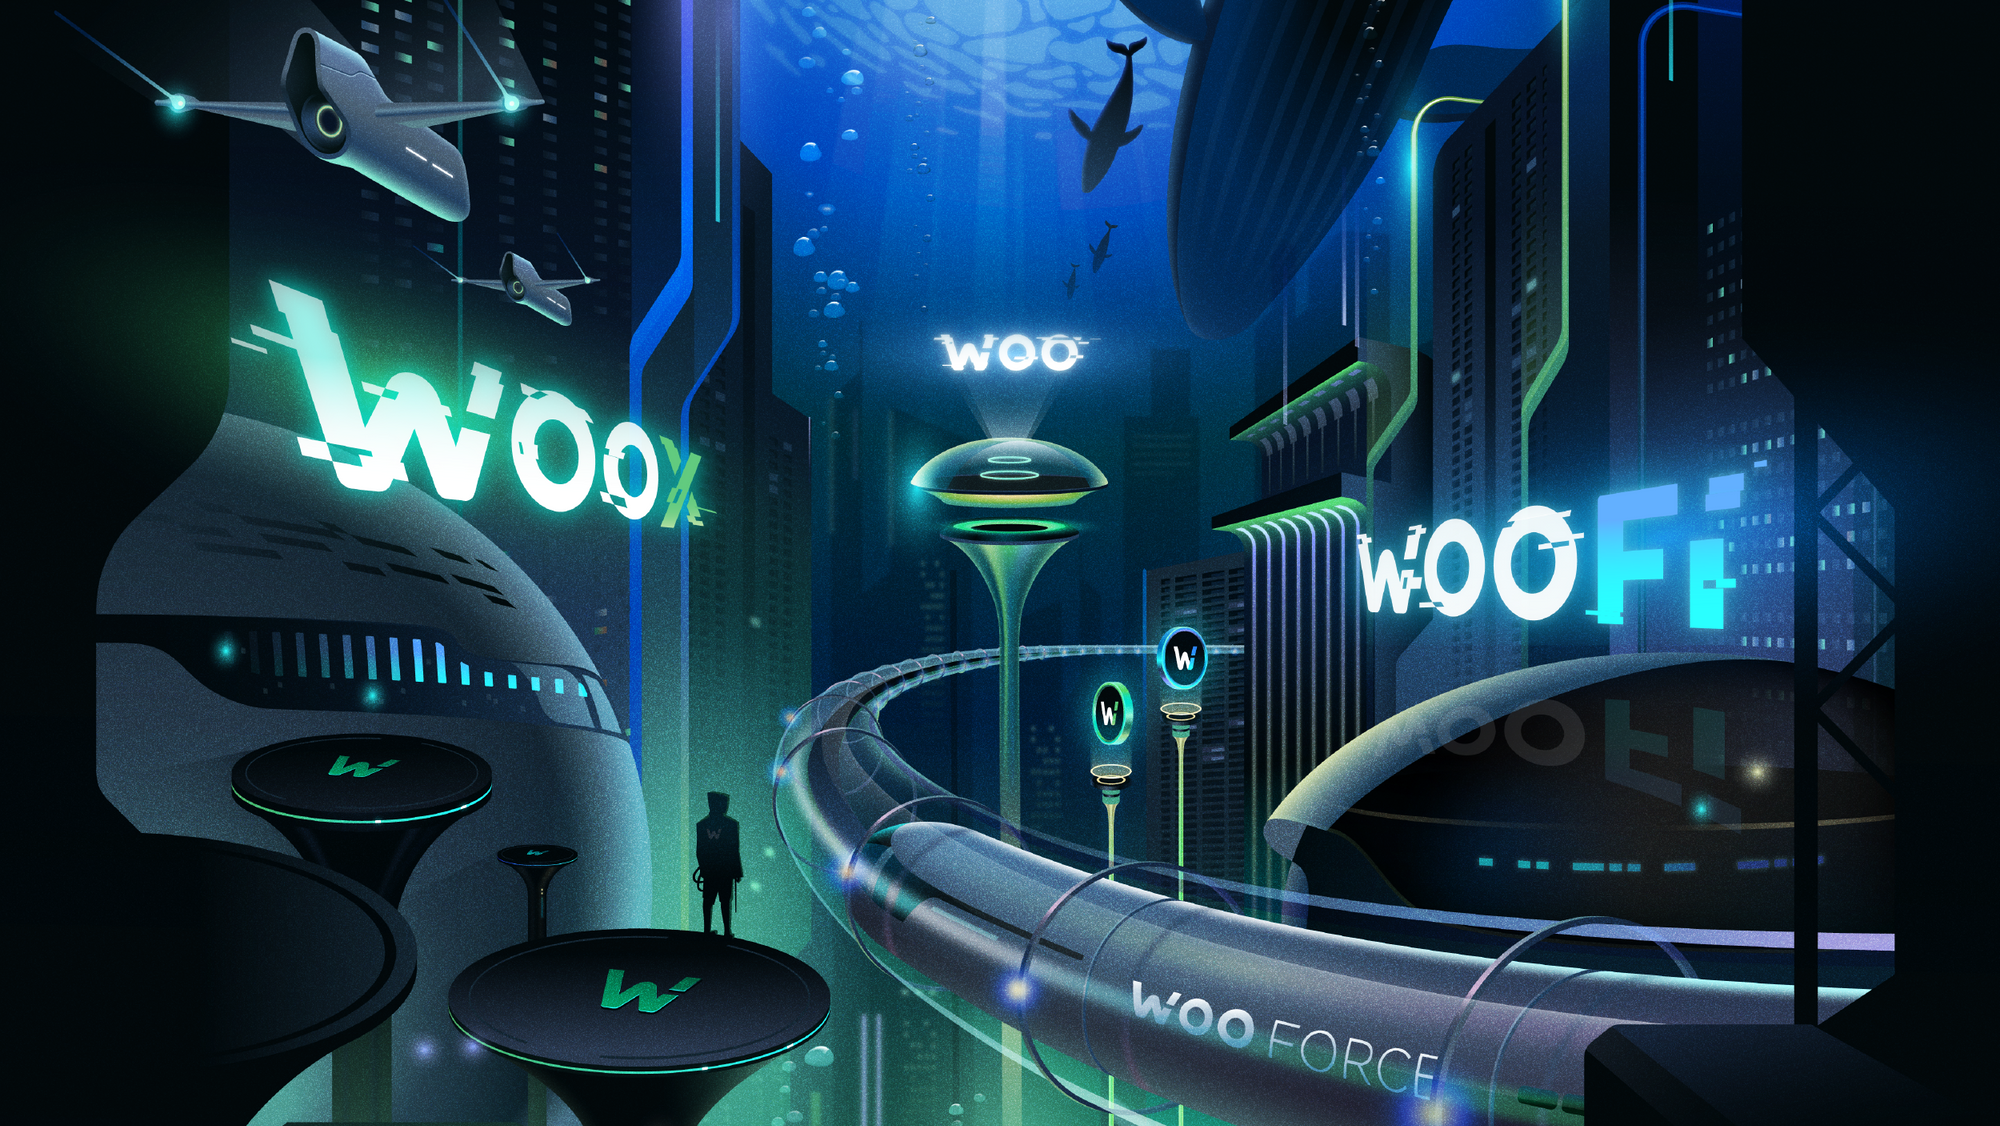 Building in Bear: WOOtopia offers a peek at WOO Network's optimistic plans